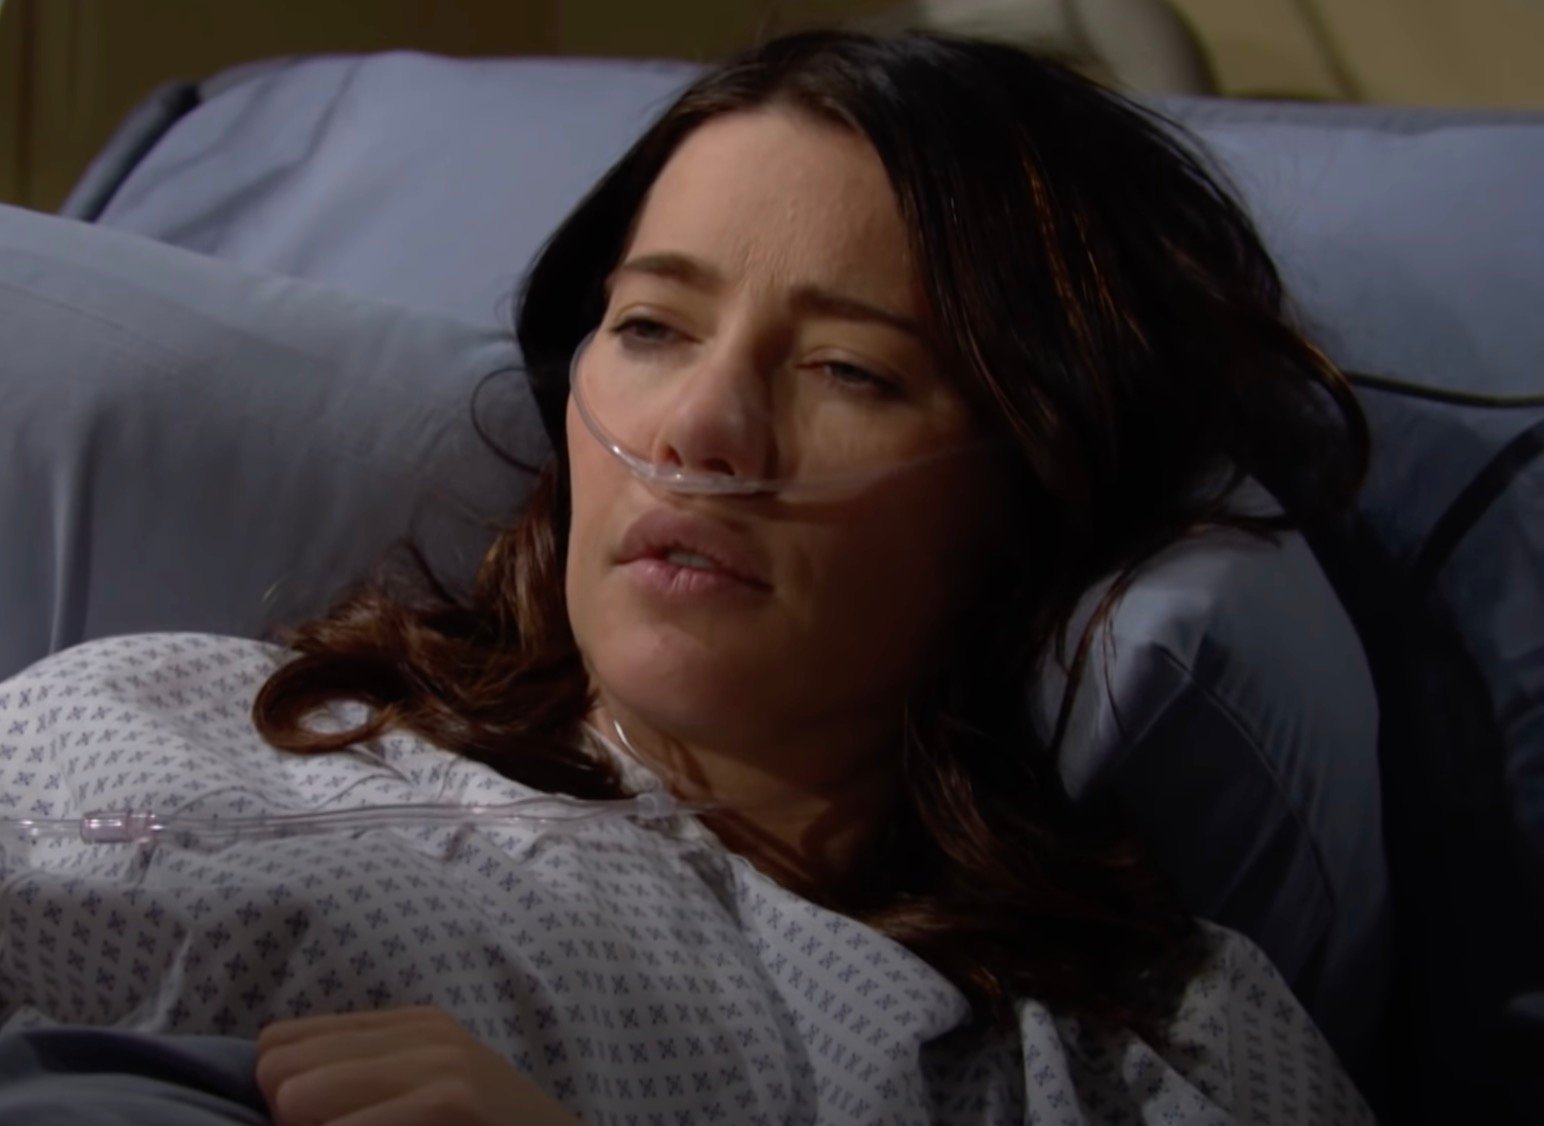 'The Bold and the Beautiful' Fans Want Steffy to Move On With an Old